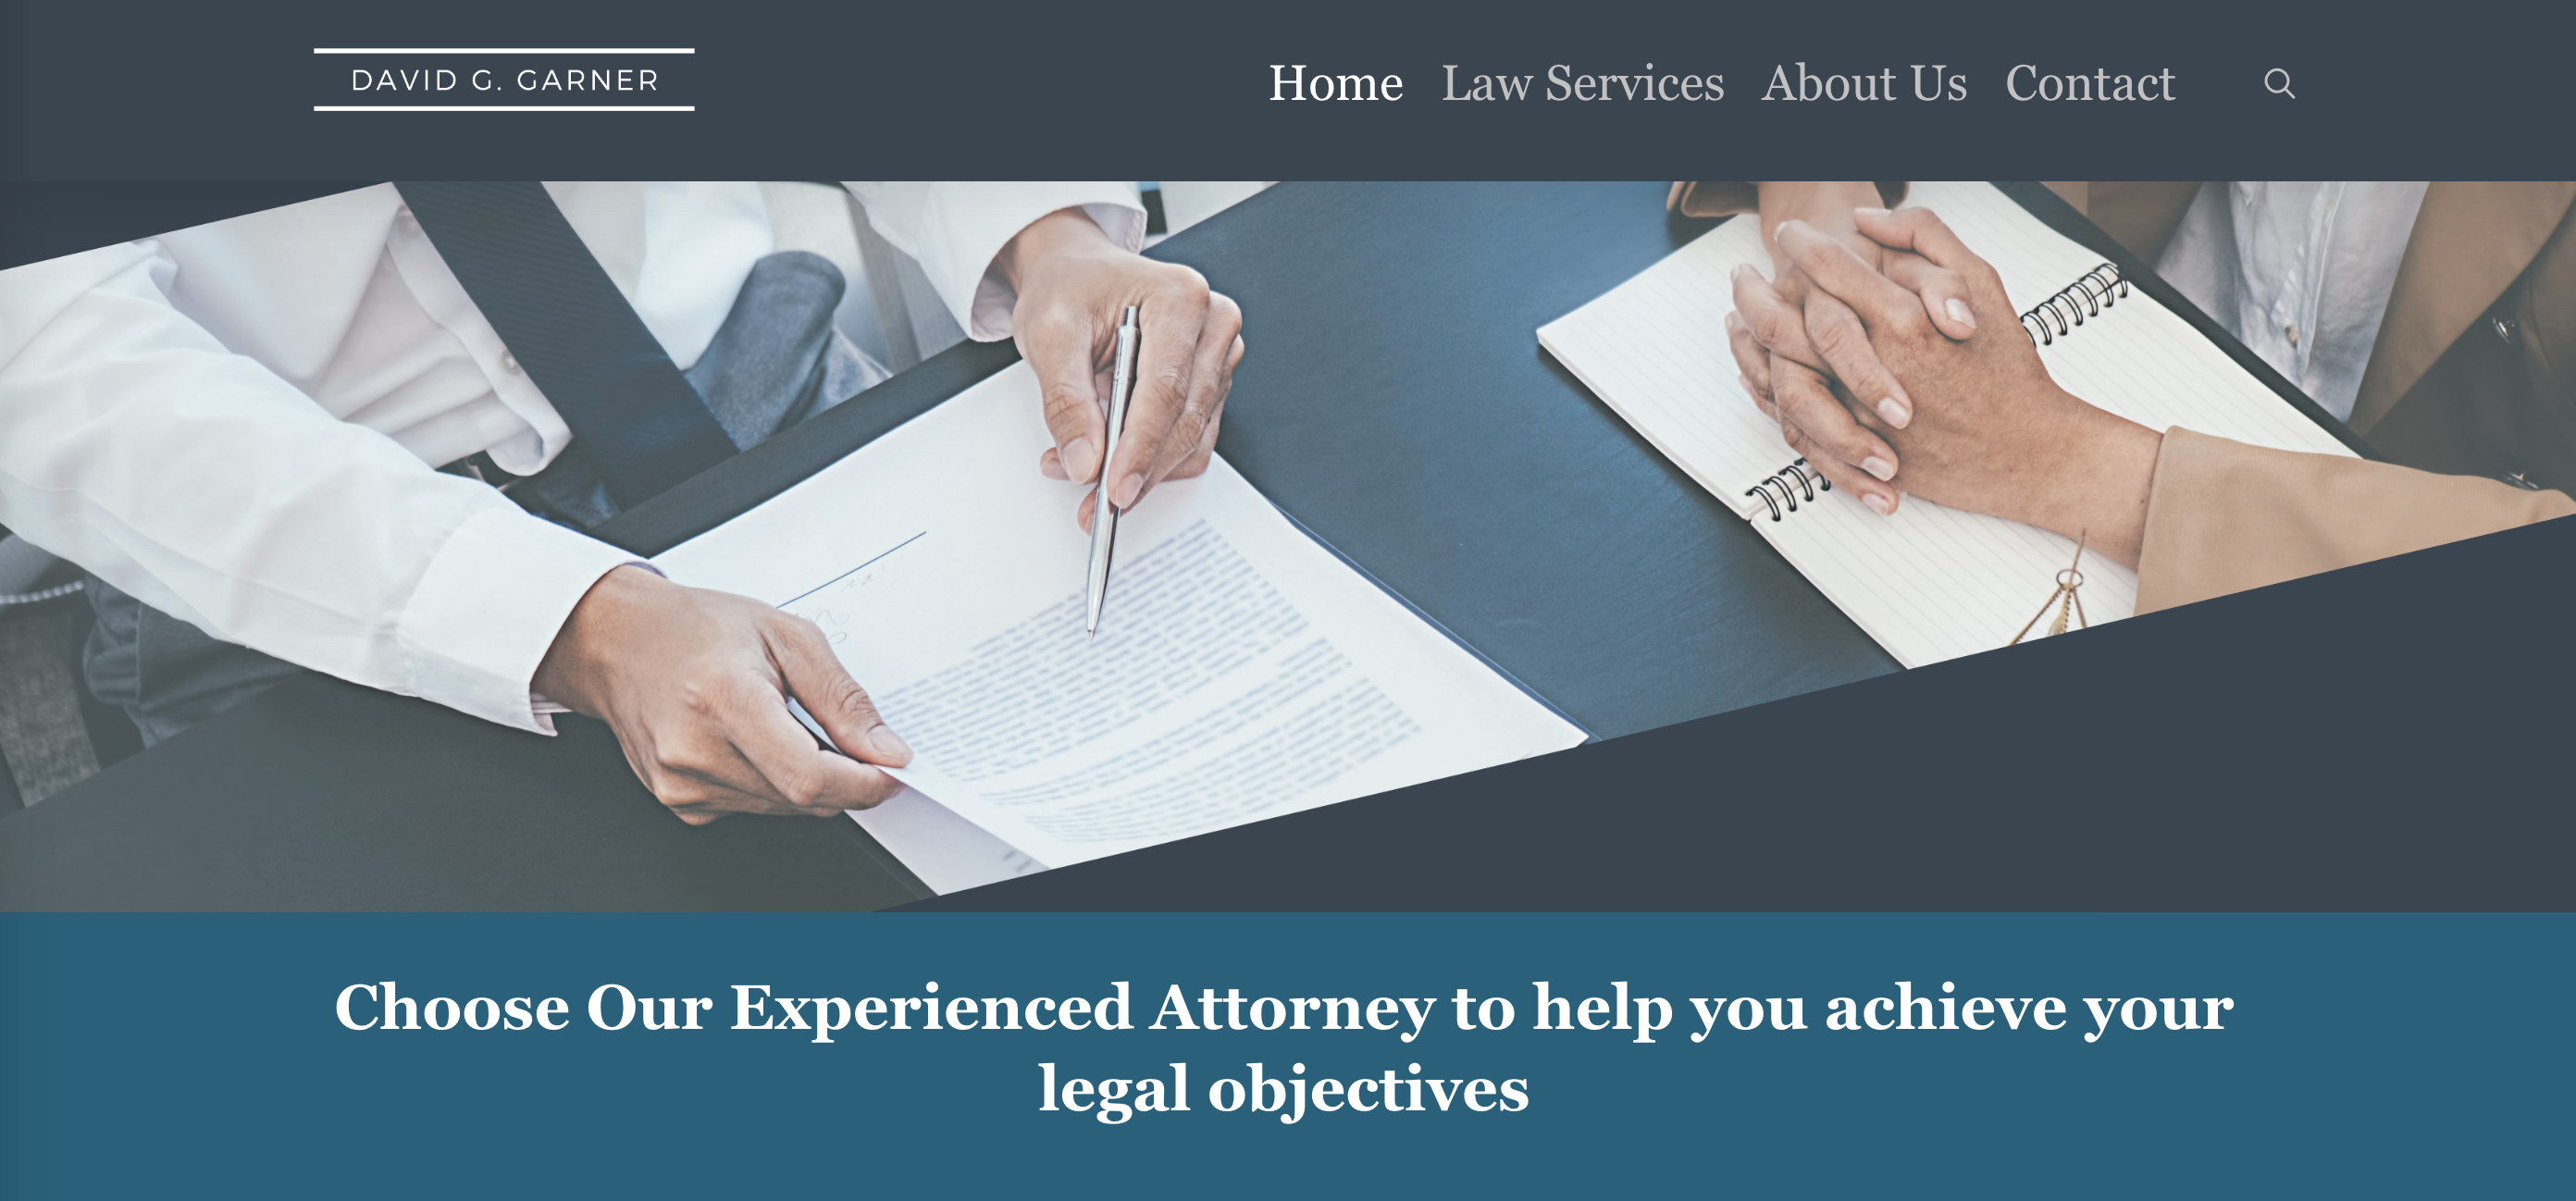 Website design for Law Firms in Montgomery County PA